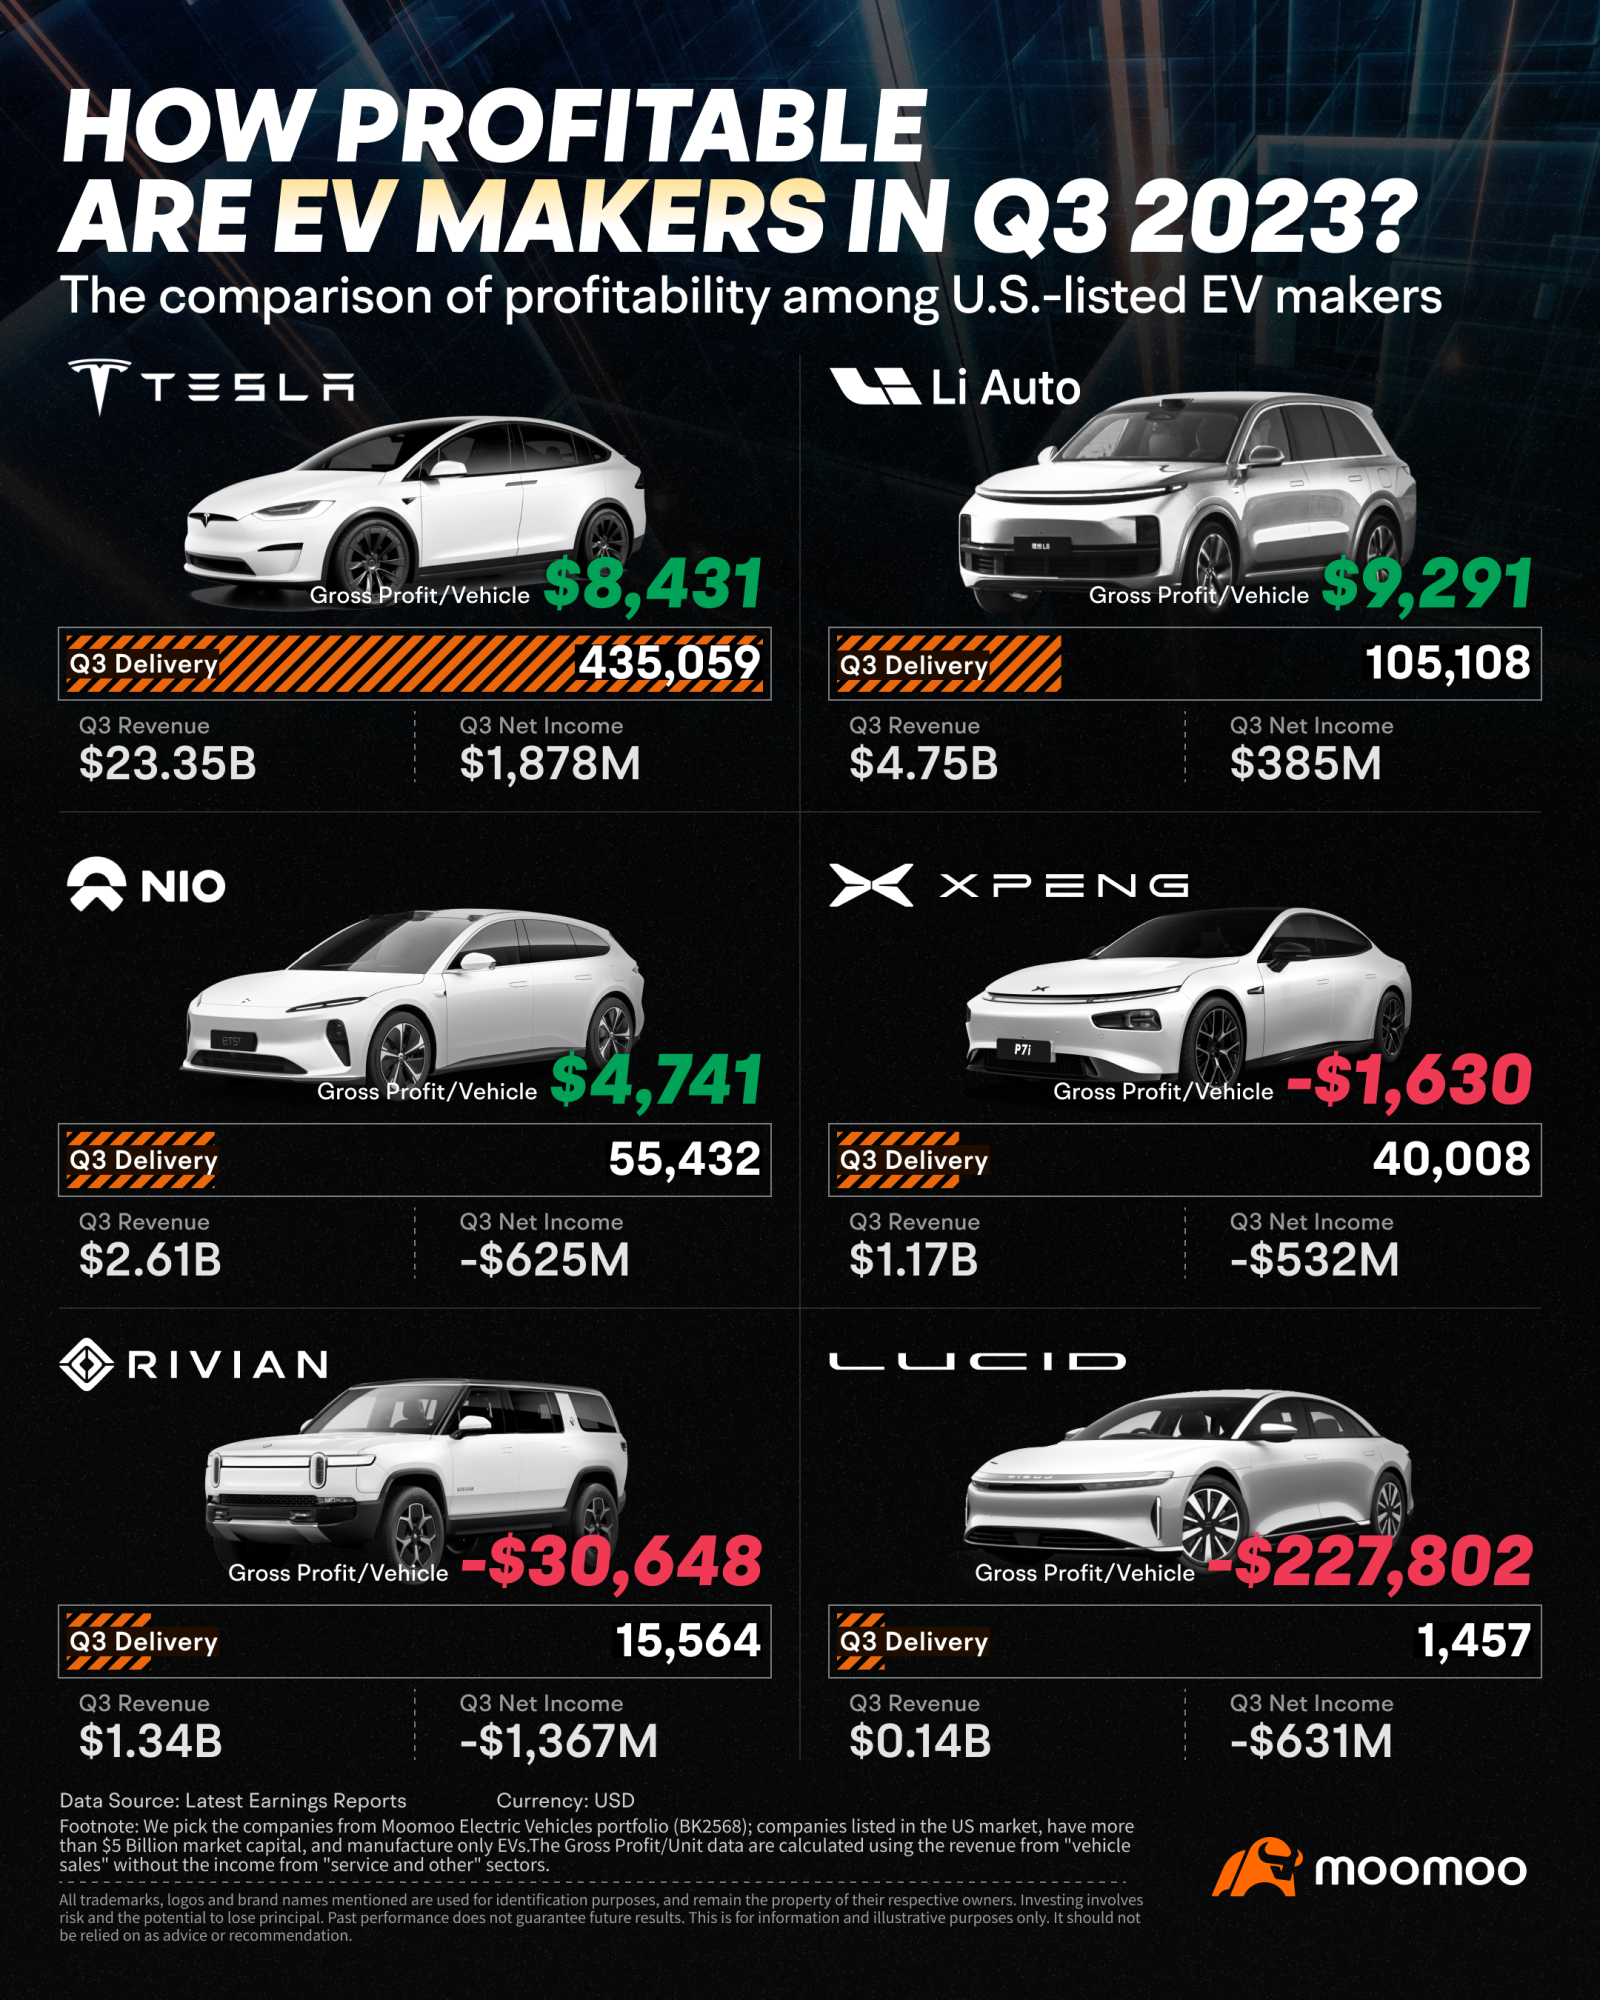 How Profitable Are EV Makers in Q3 2023?